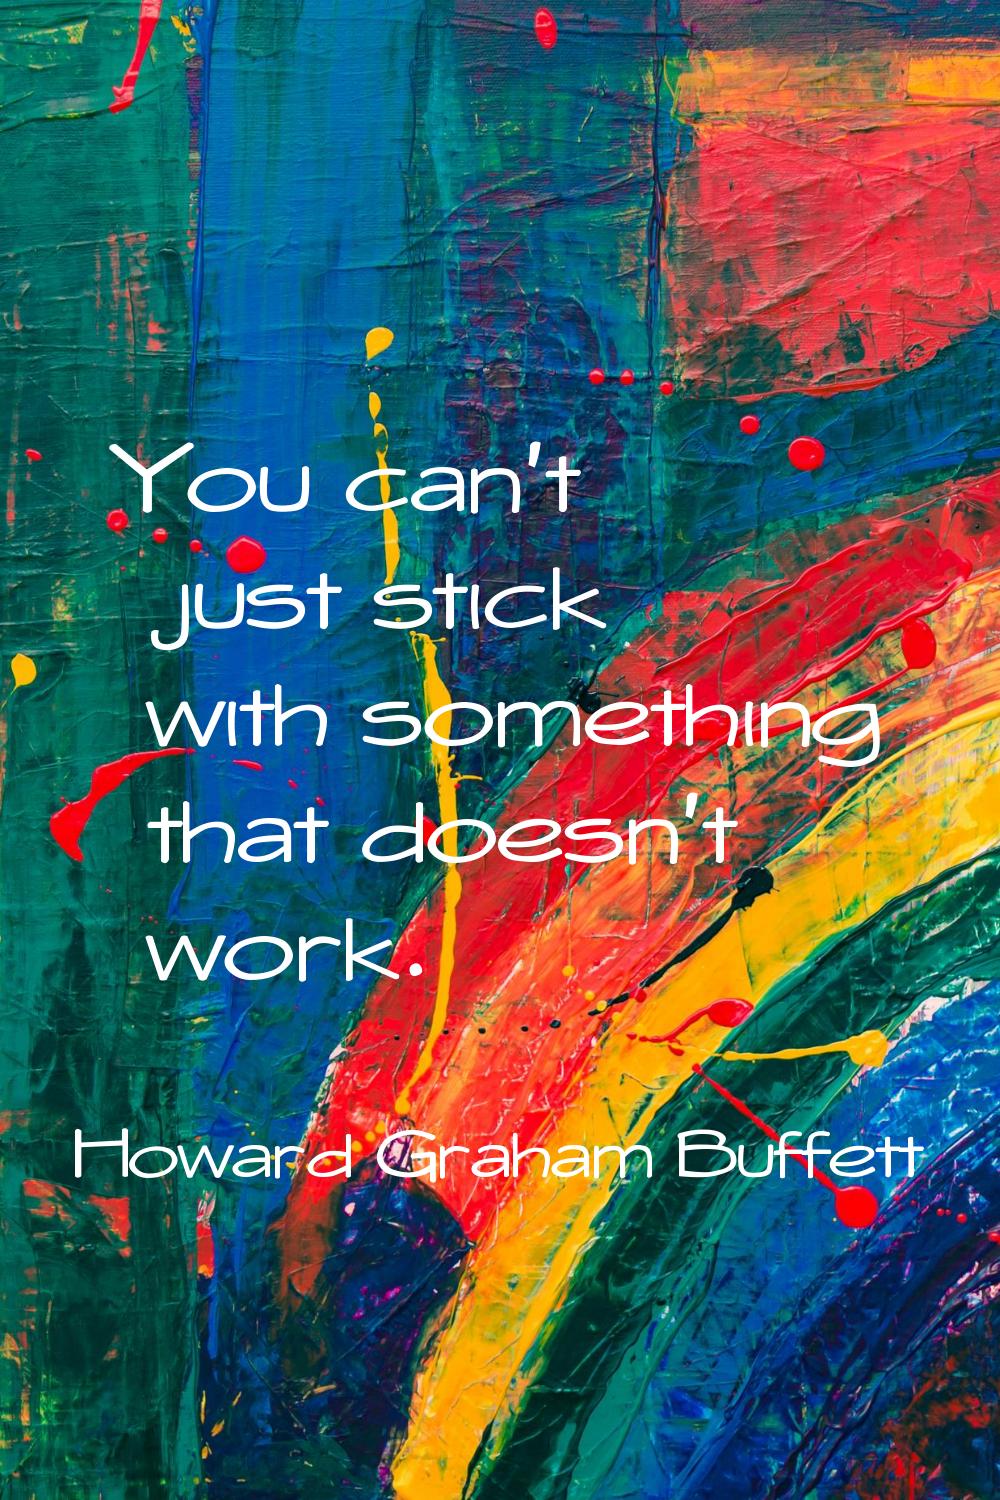 You can't just stick with something that doesn't work.